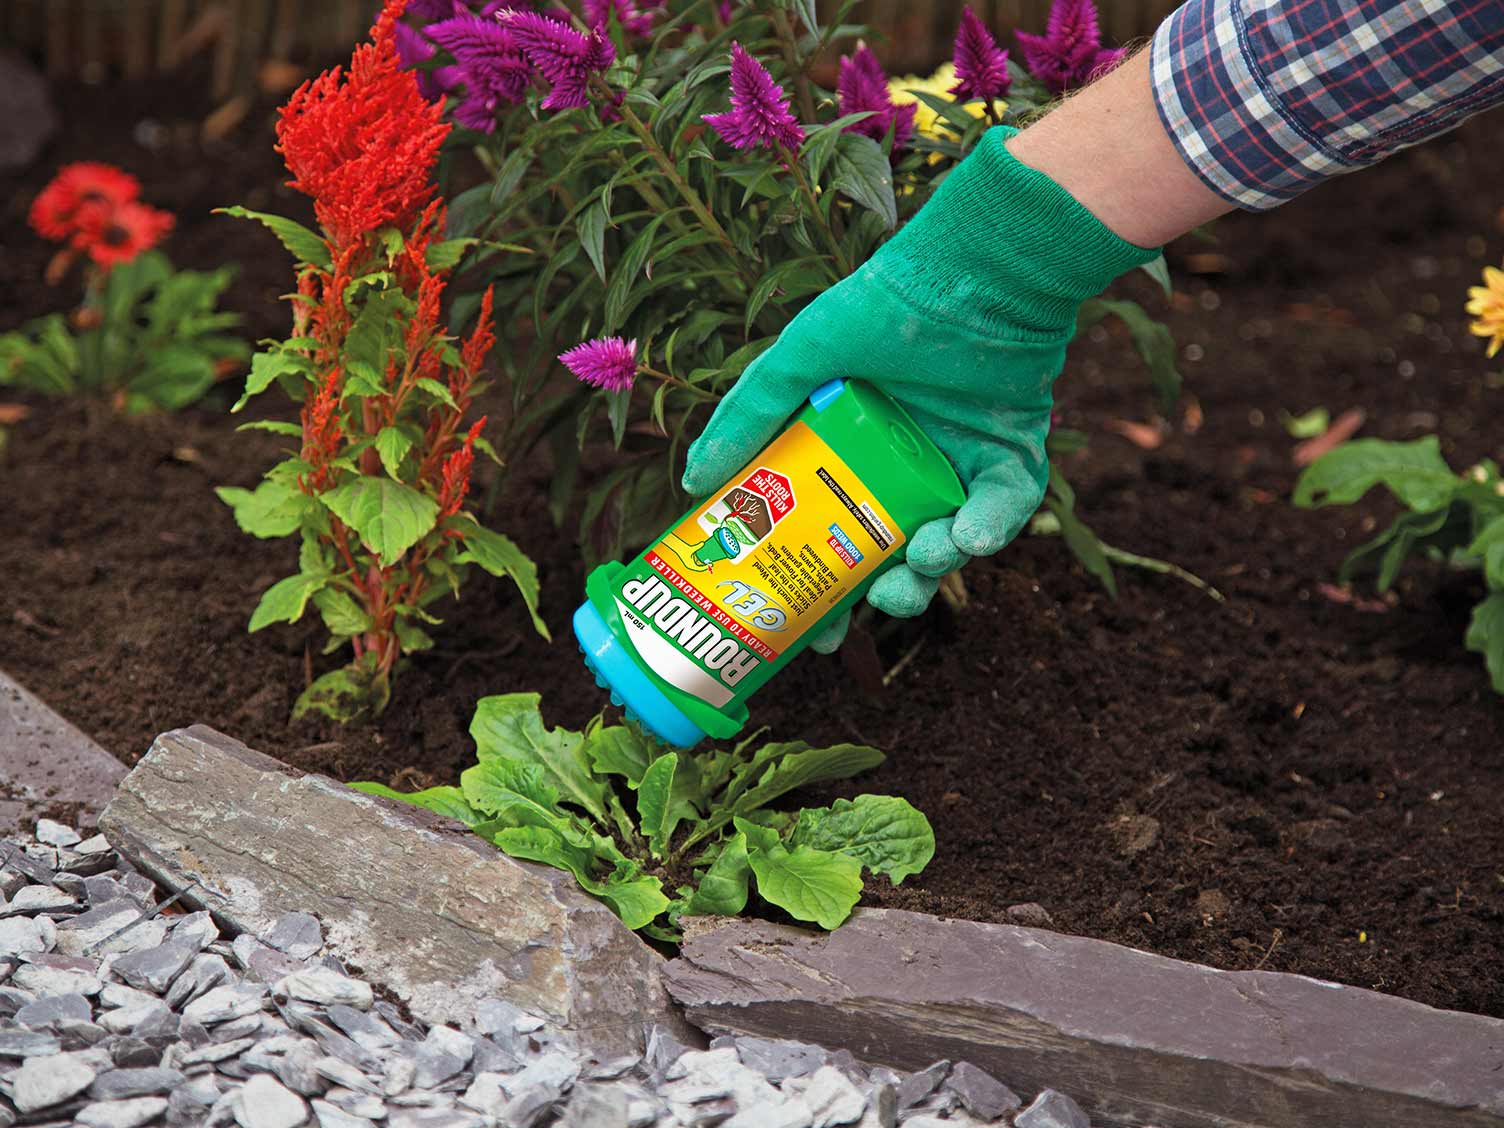 How to prevent weeds from growing in flower beds